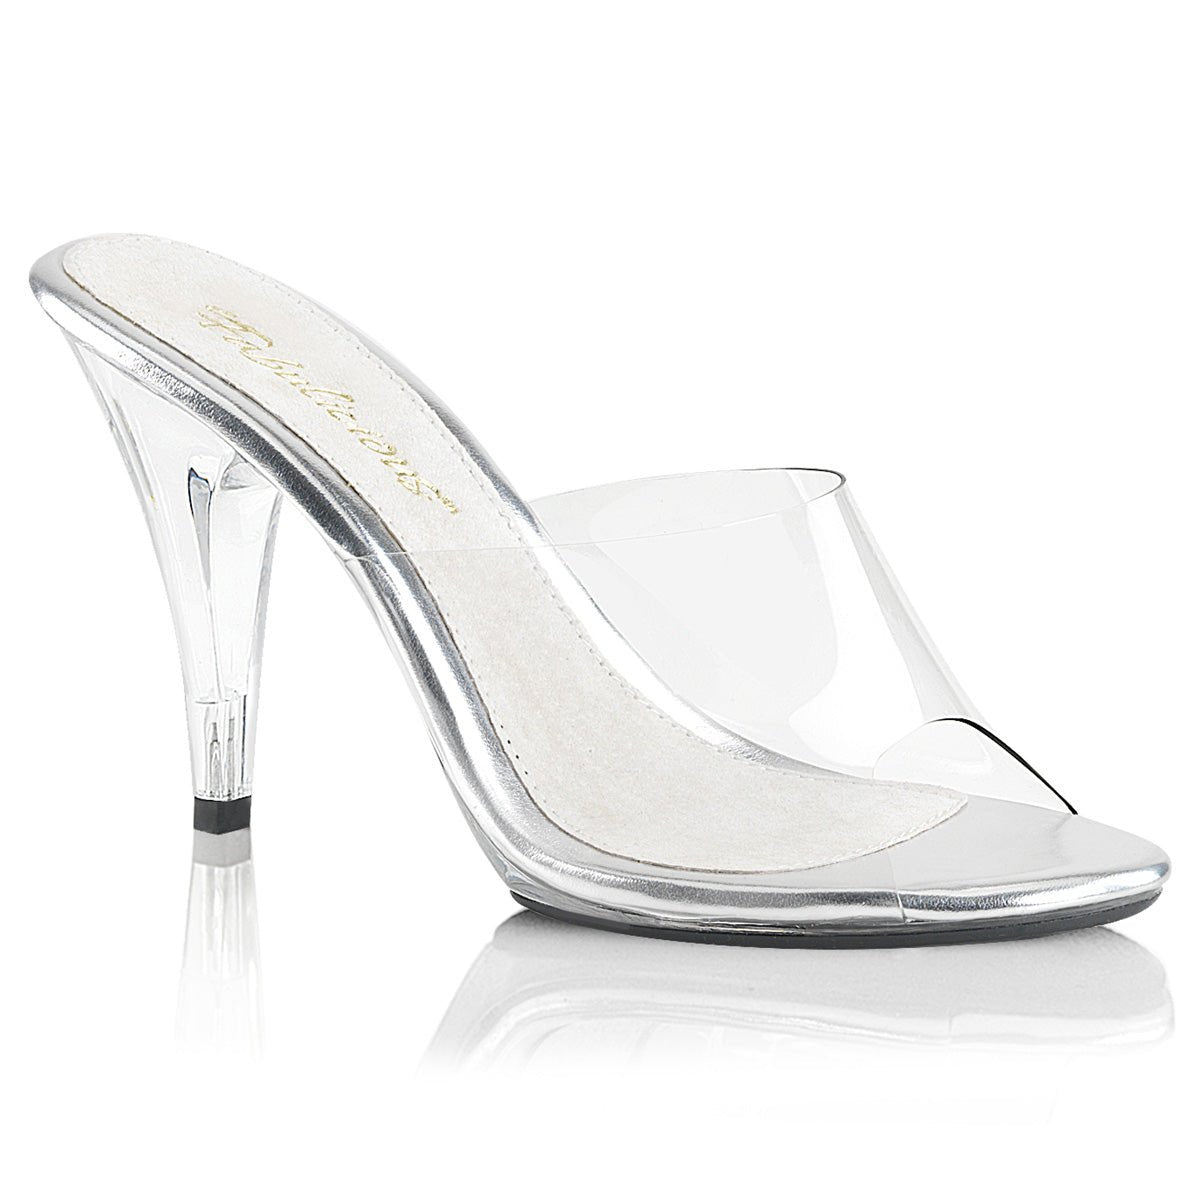 Fabulicious Caress 401 Clear - Model Express VancouverShoes